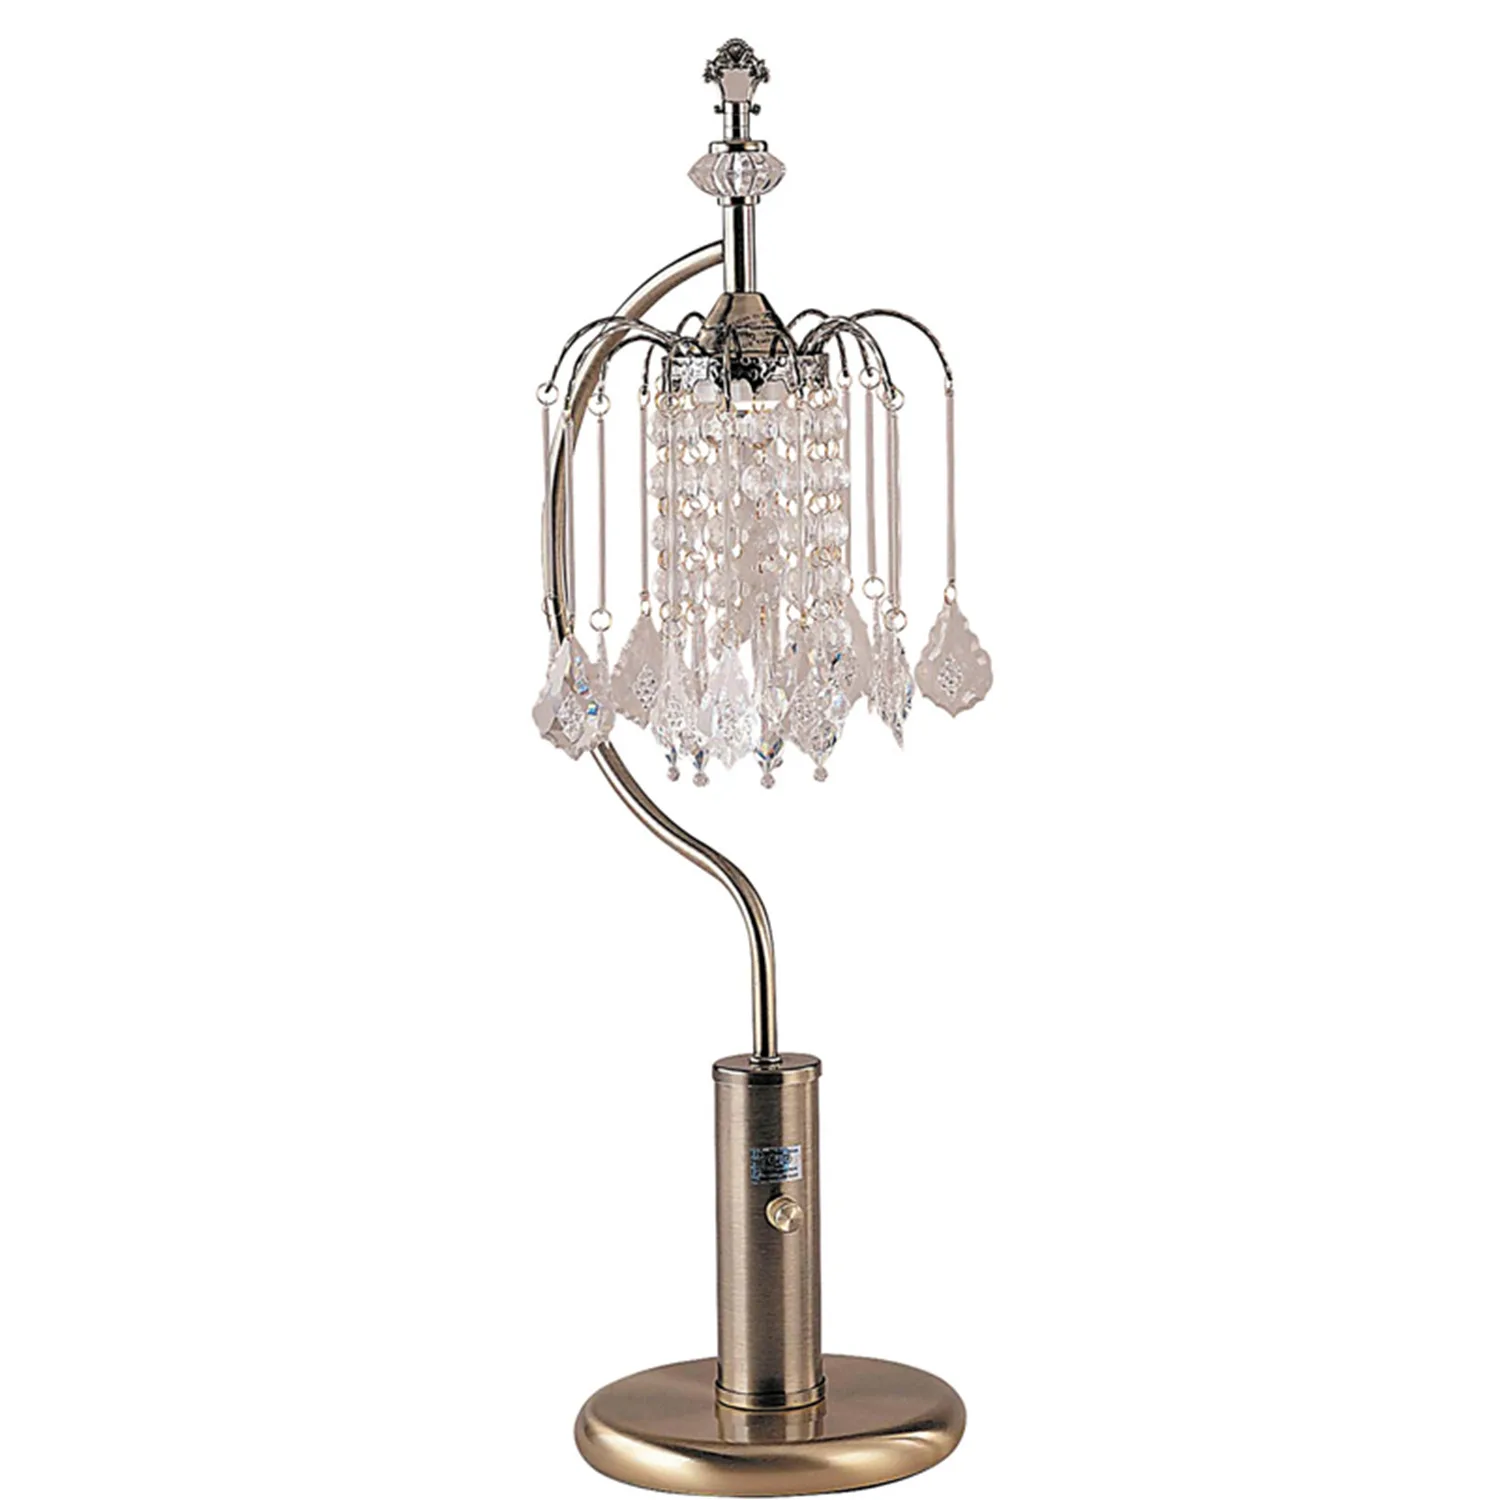 

HMTX 715AB 27 in. Ant Brass Table Lamp With Crystal Inspired Shade